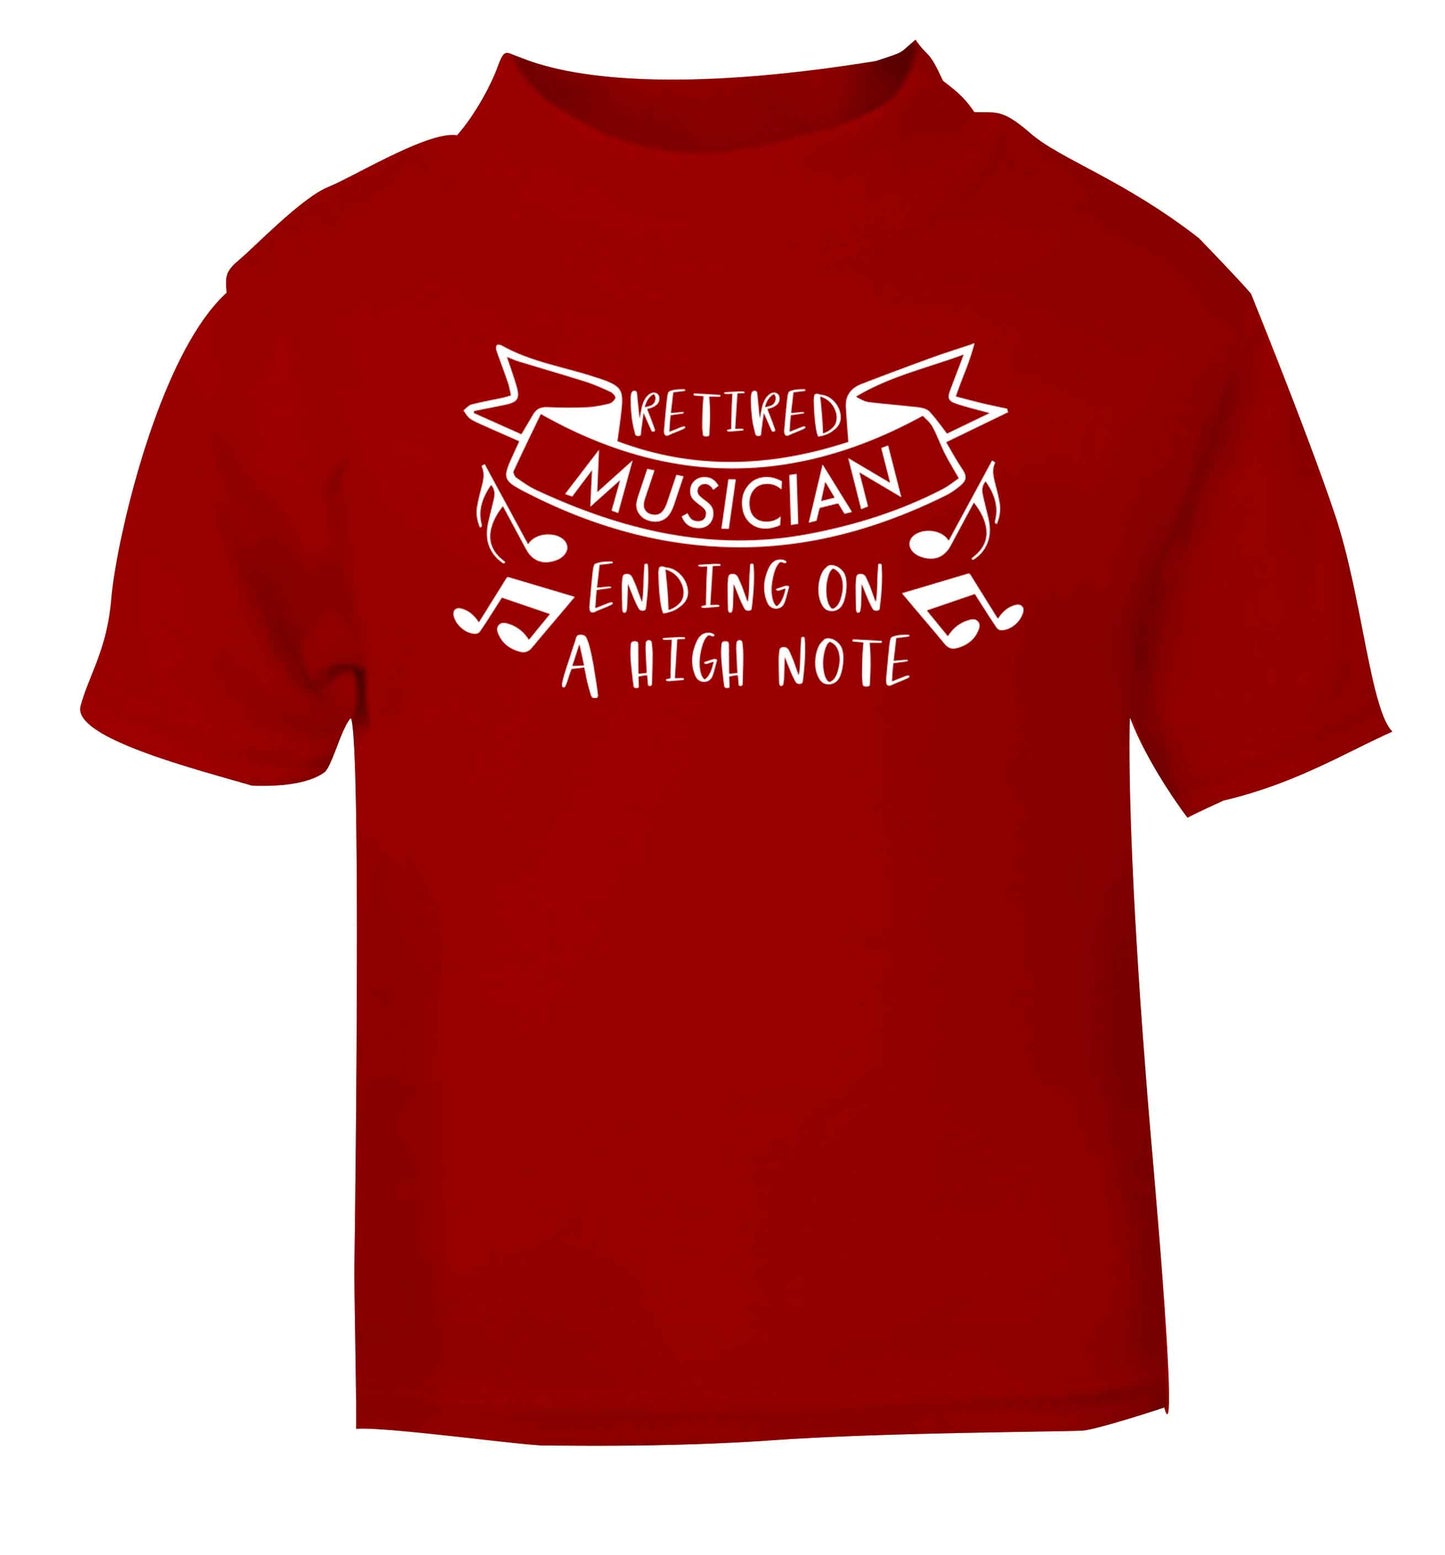 Retired musician ending on a high note red Baby Toddler Tshirt 2 Years